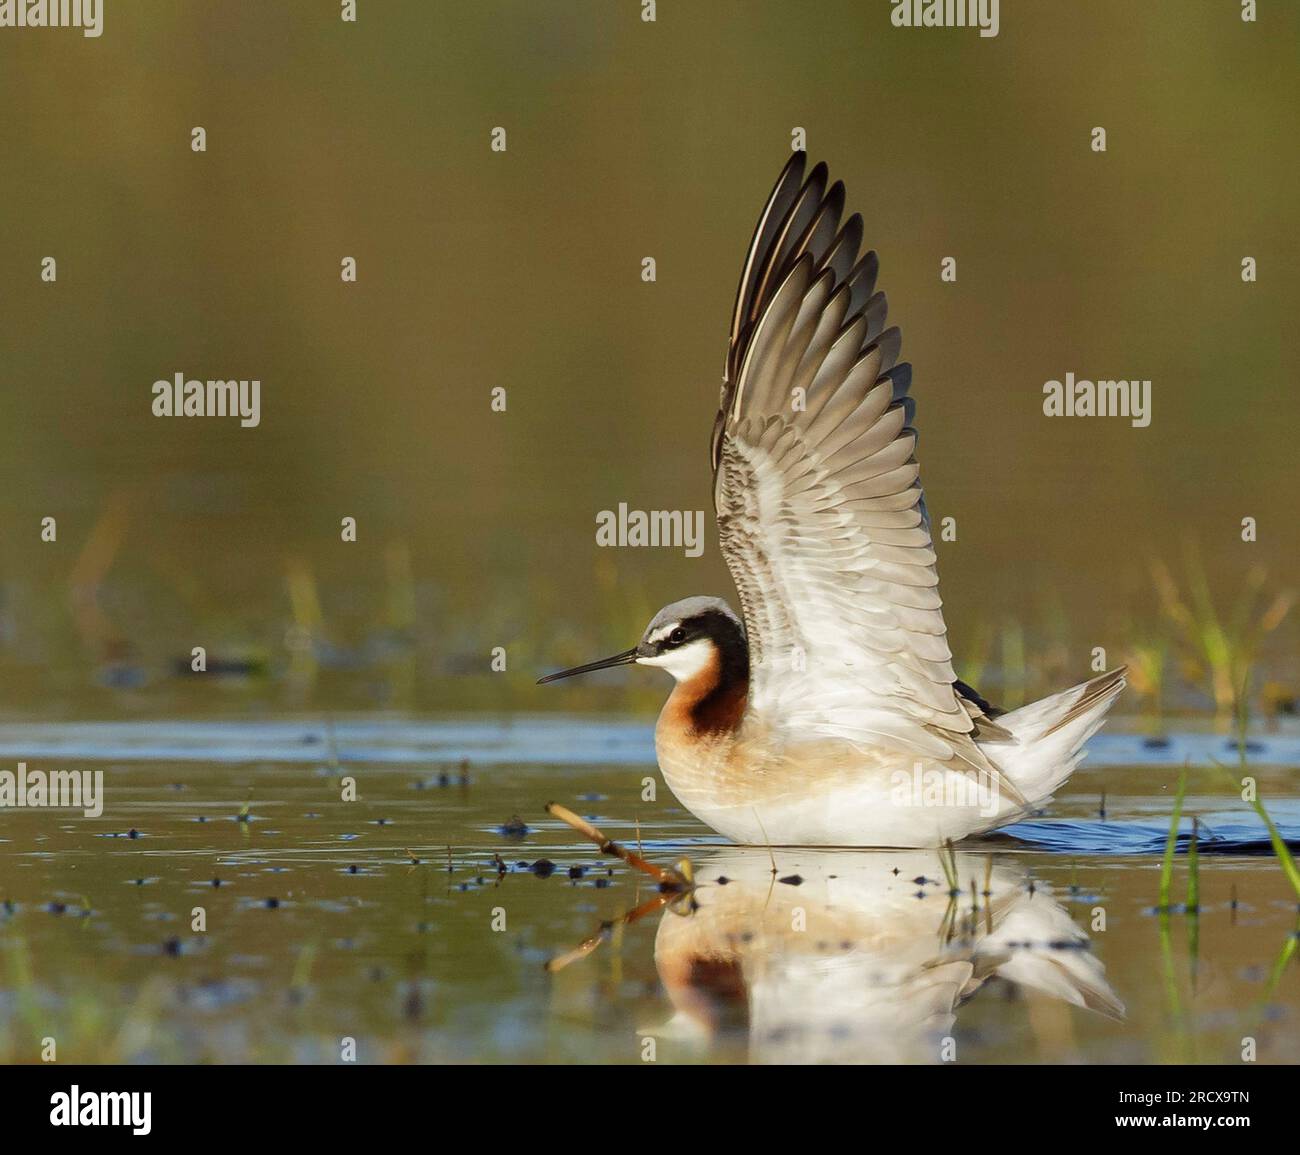 wilson's phalarope (Phalaropus tricolor, Steganopus tricolor), female in breeding plumage with wings outstretched in shallow water, side view, USA, Stock Photo